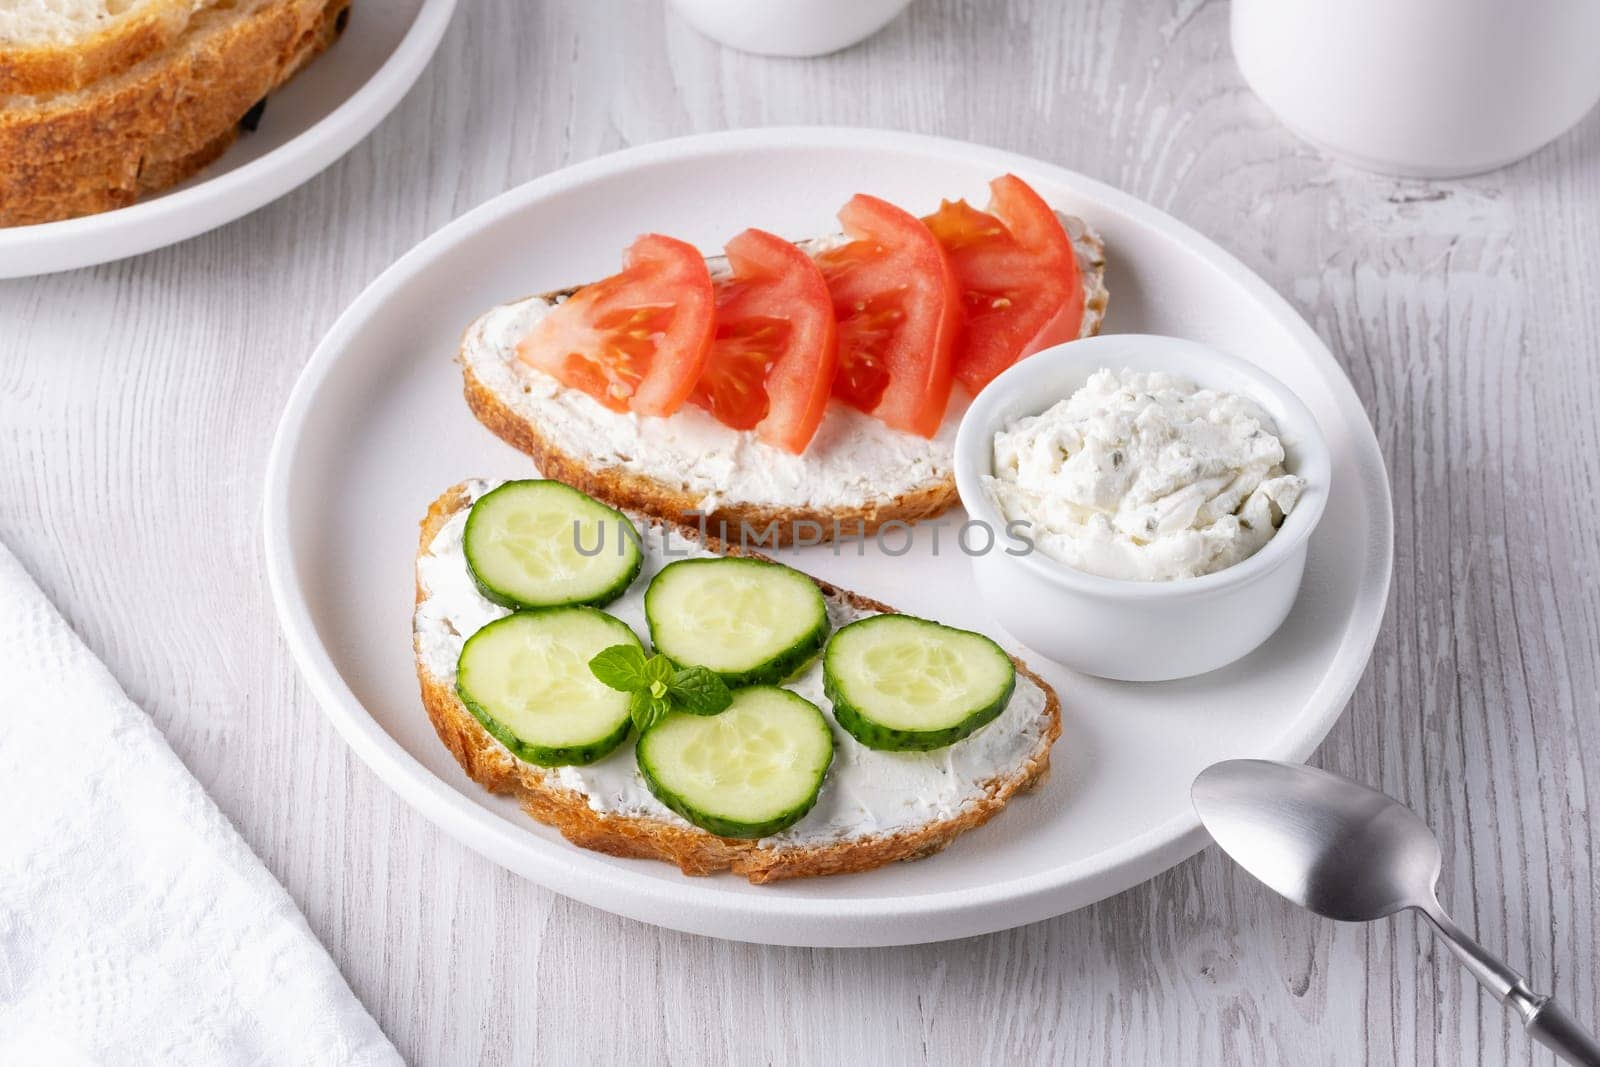 Healthy sandwiches with white cottage cheese, cucumber and tomato by NataliPopova